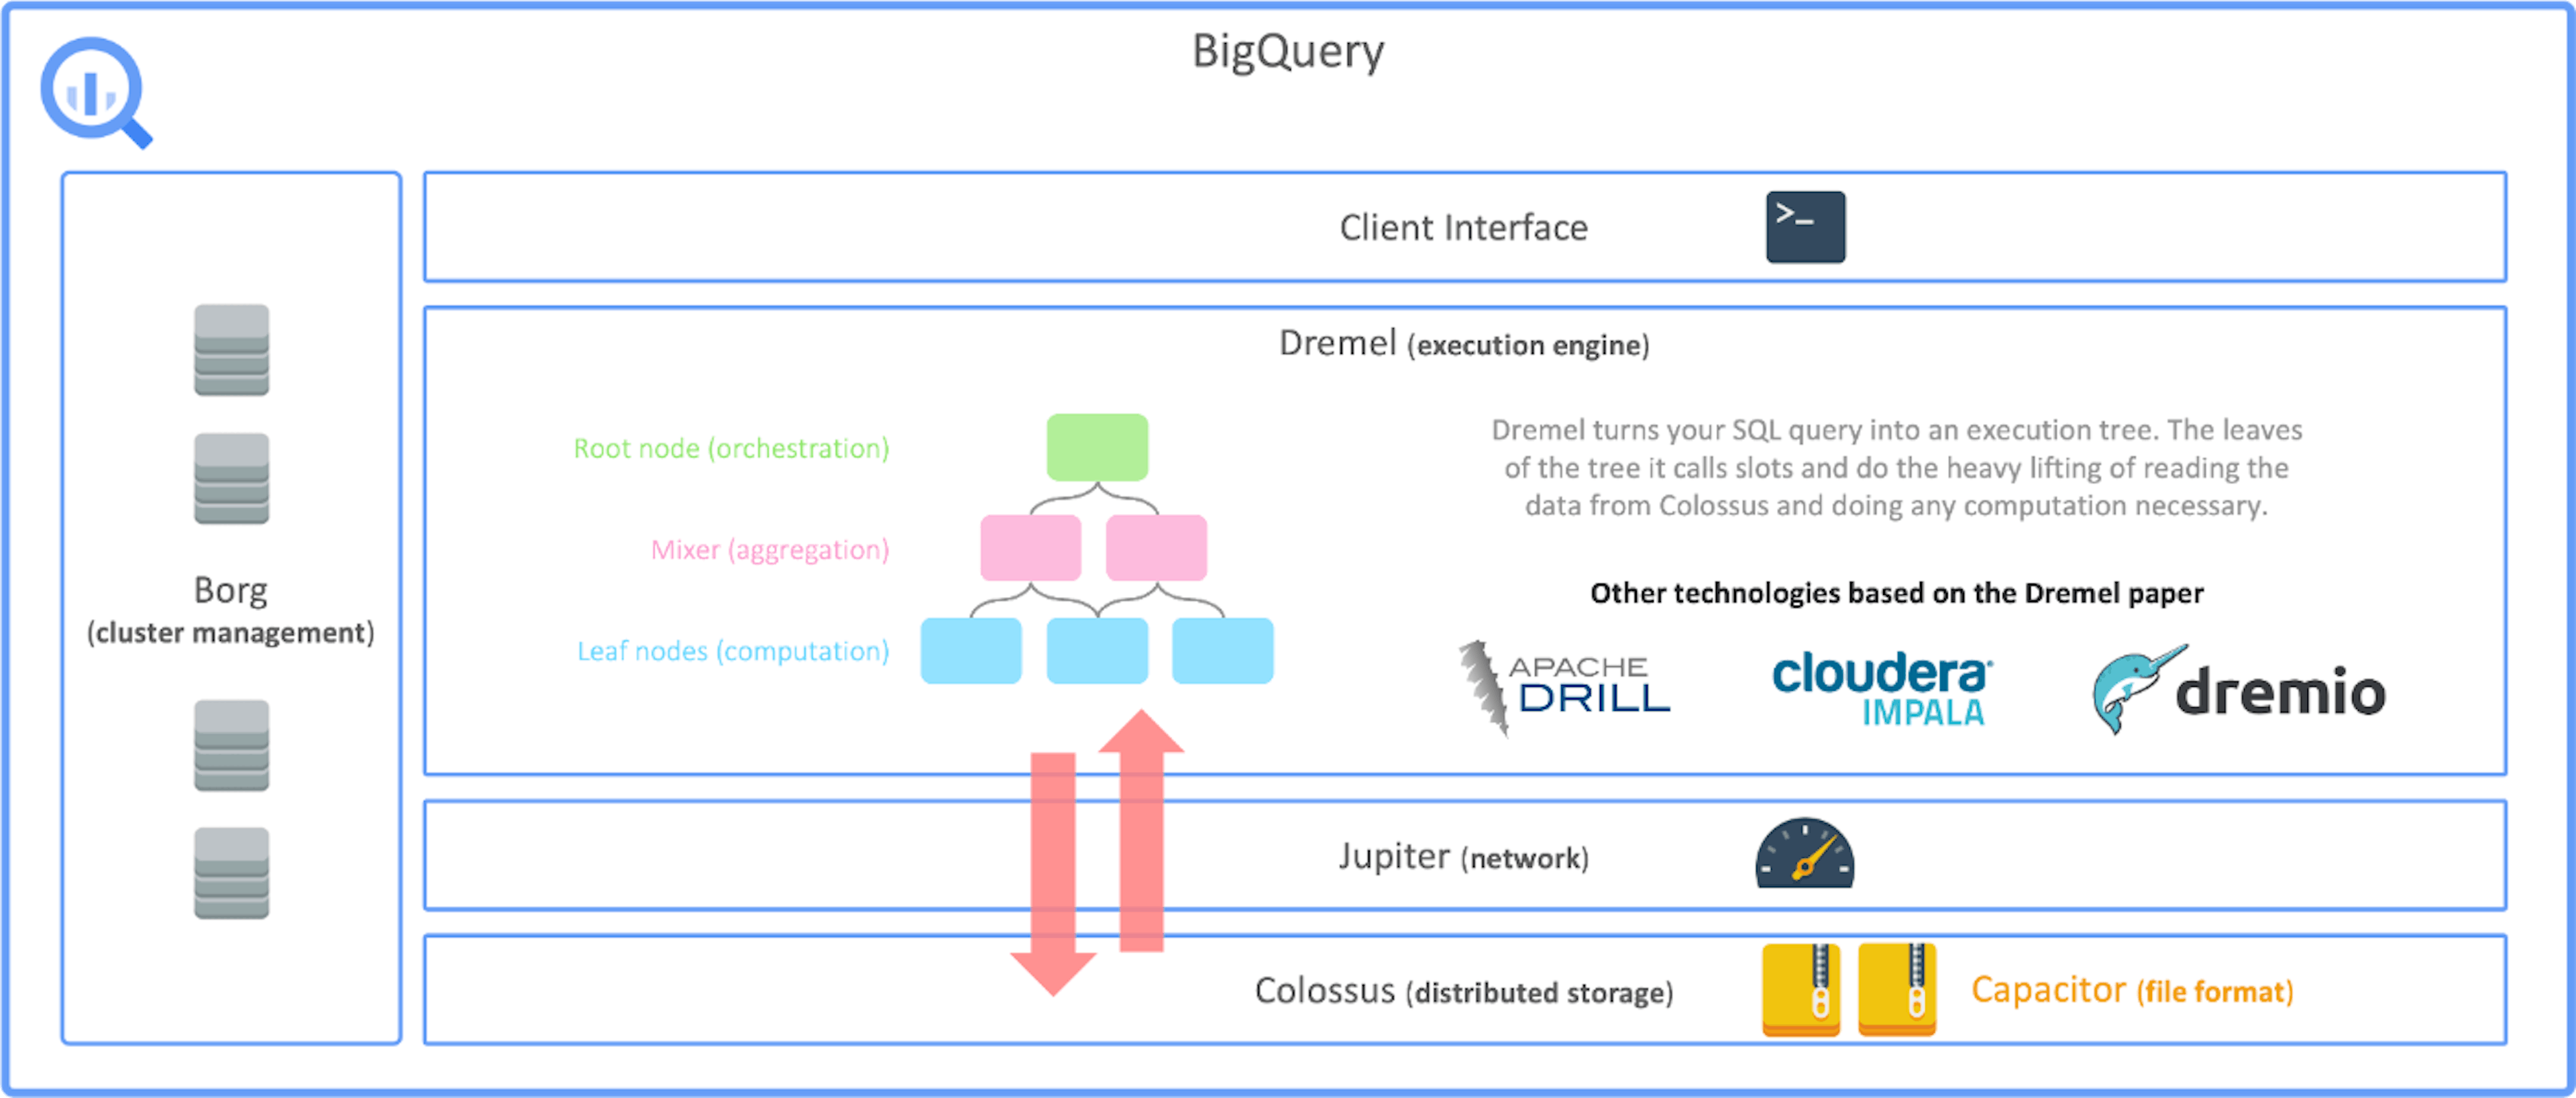 BigQuery architecture (by author)